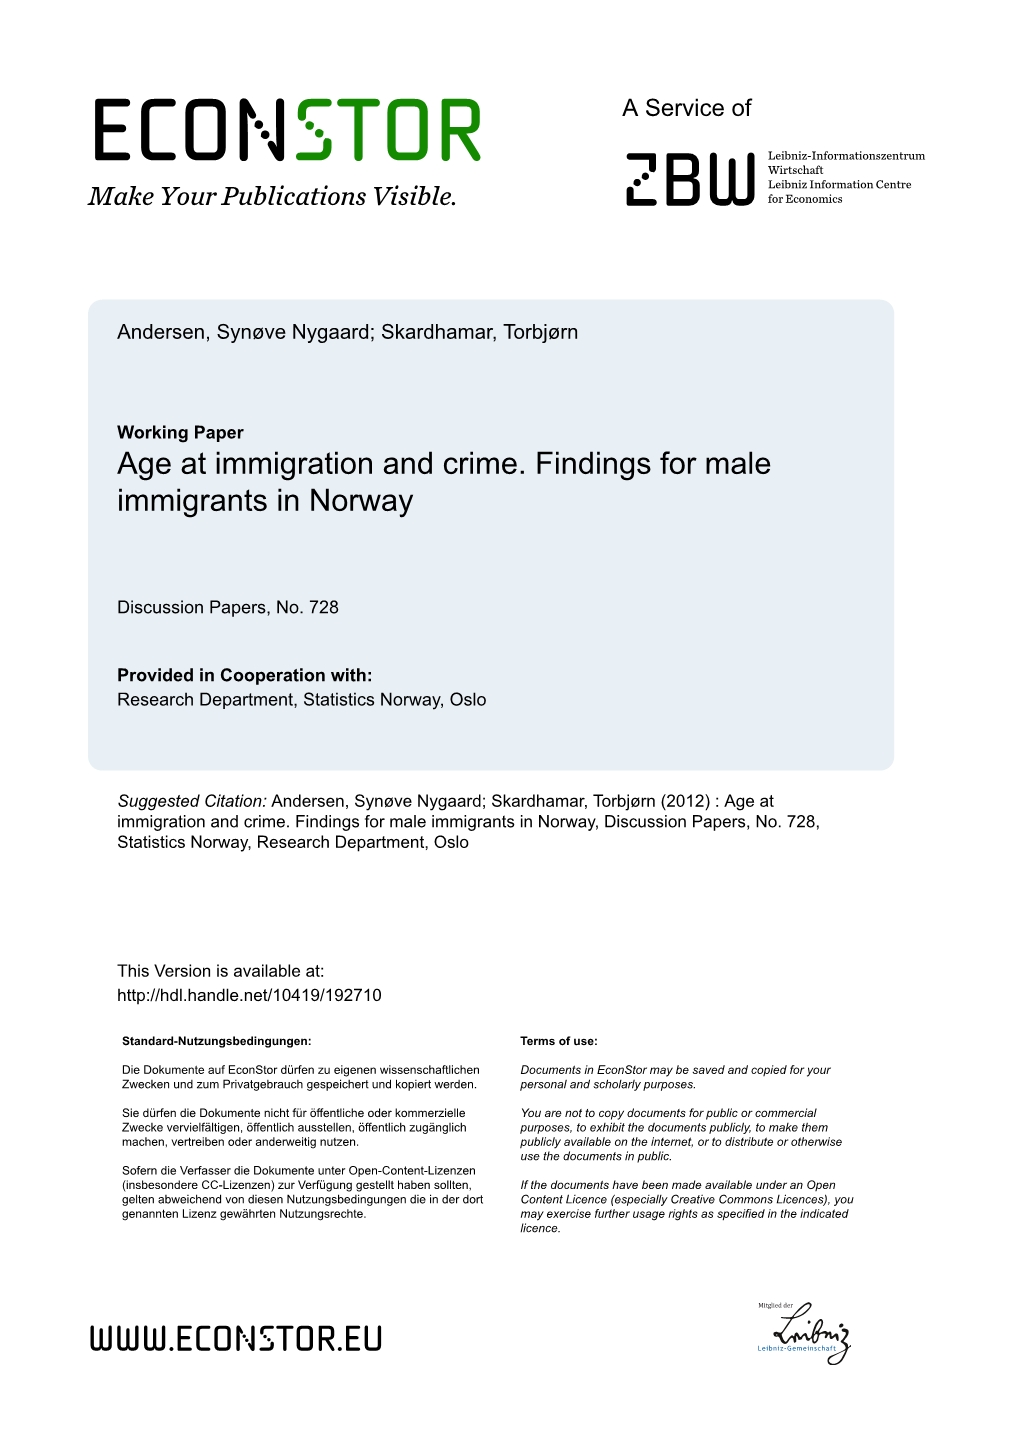 Age at Immigration and Crime. Findings for Male Immigrants in Norway